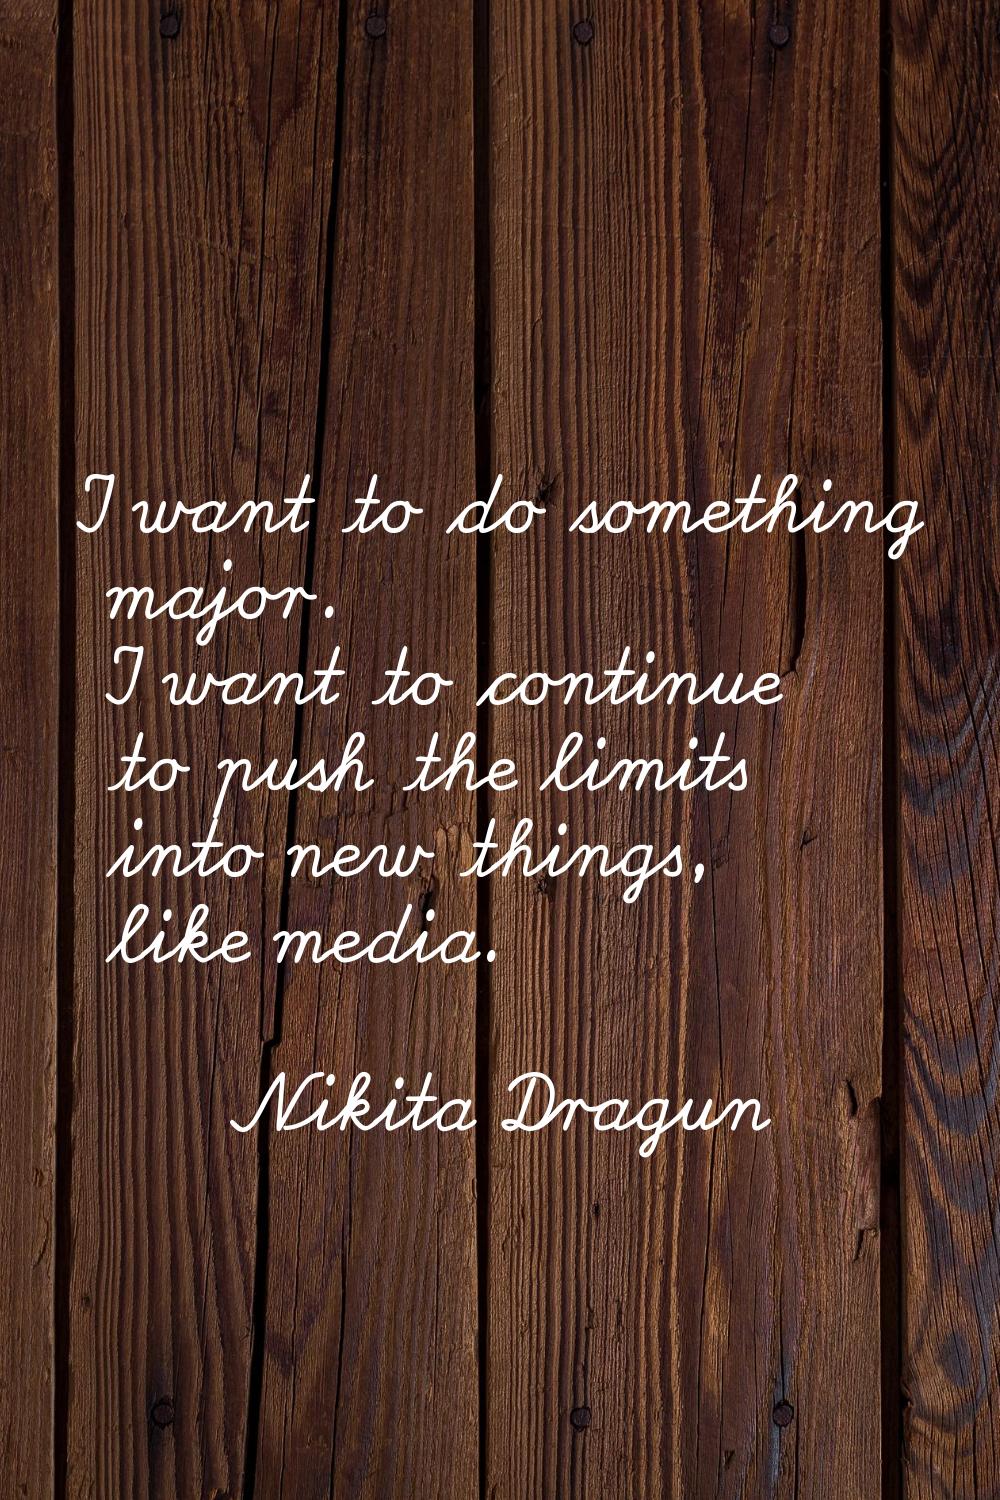 I want to do something major. I want to continue to push the limits into new things, like media.